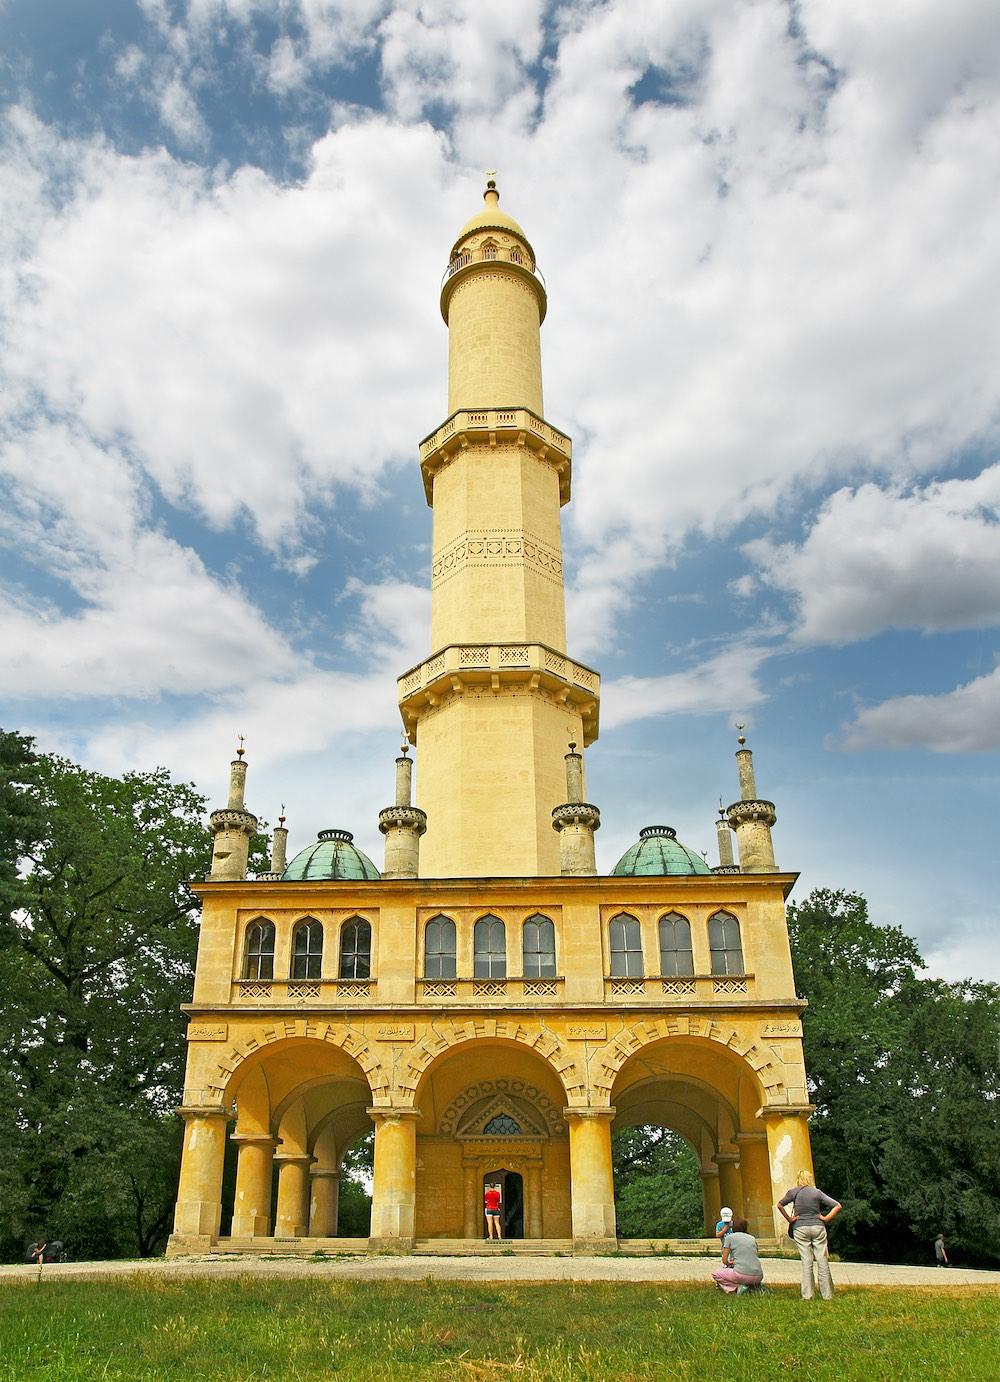 Climb the Minaret's 60 metre spiral staircase for a panoramic view of Lednice park. – © Pecold / Shutterstock